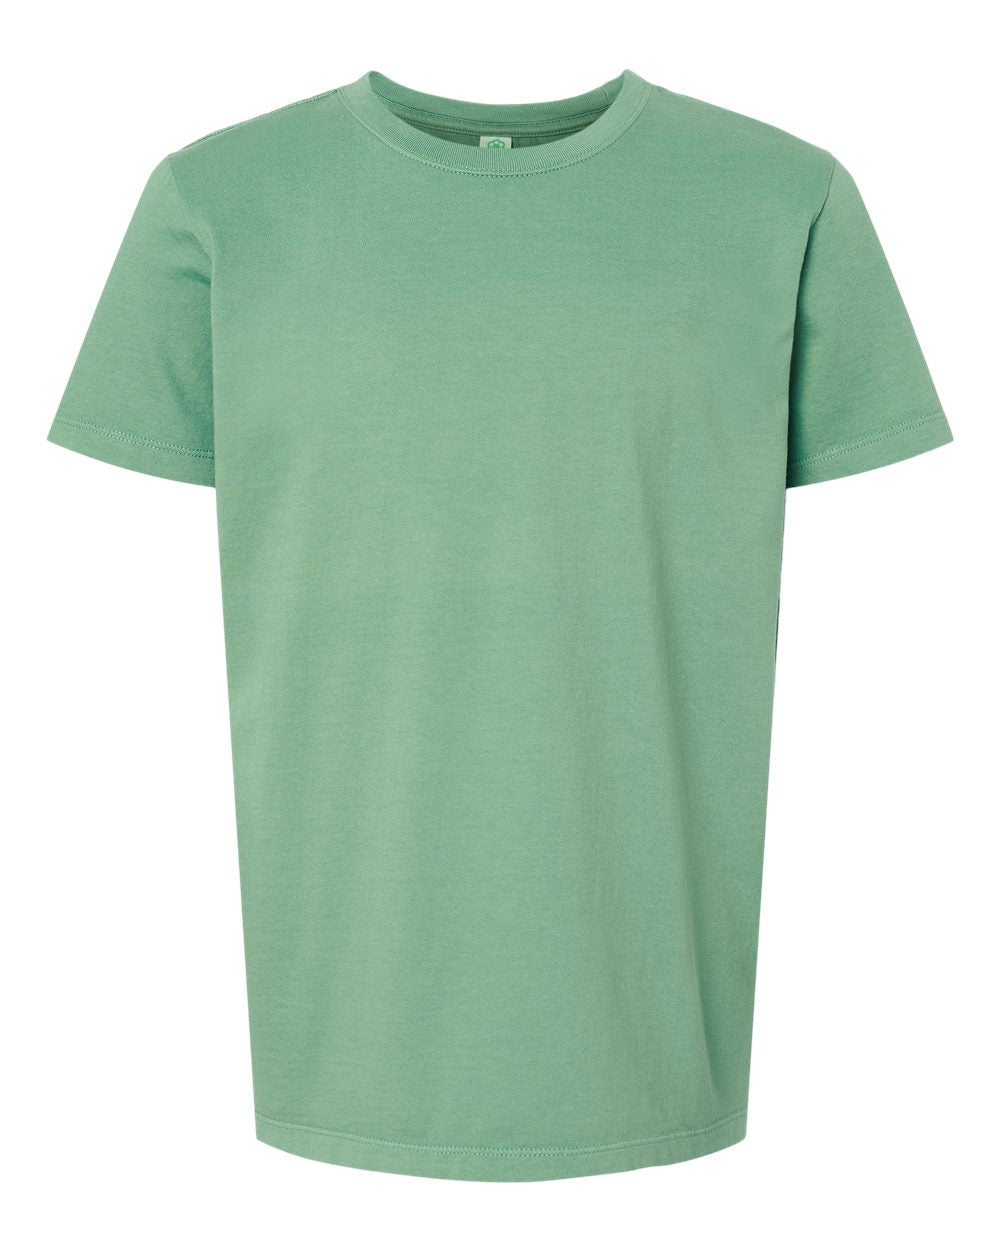 Softshirts® Youth Organic Cotton T-shirt in green